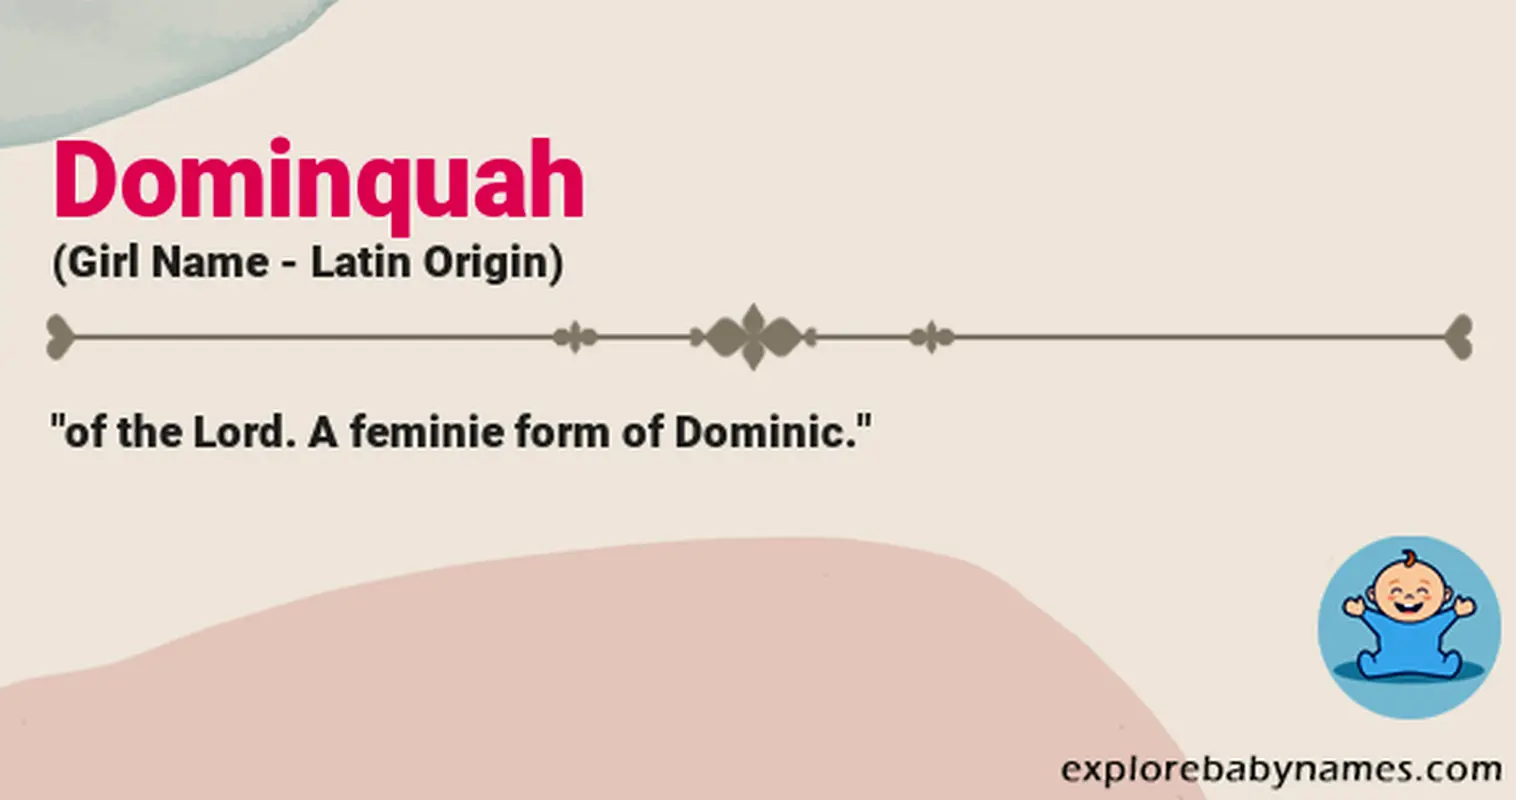 Meaning of Dominquah